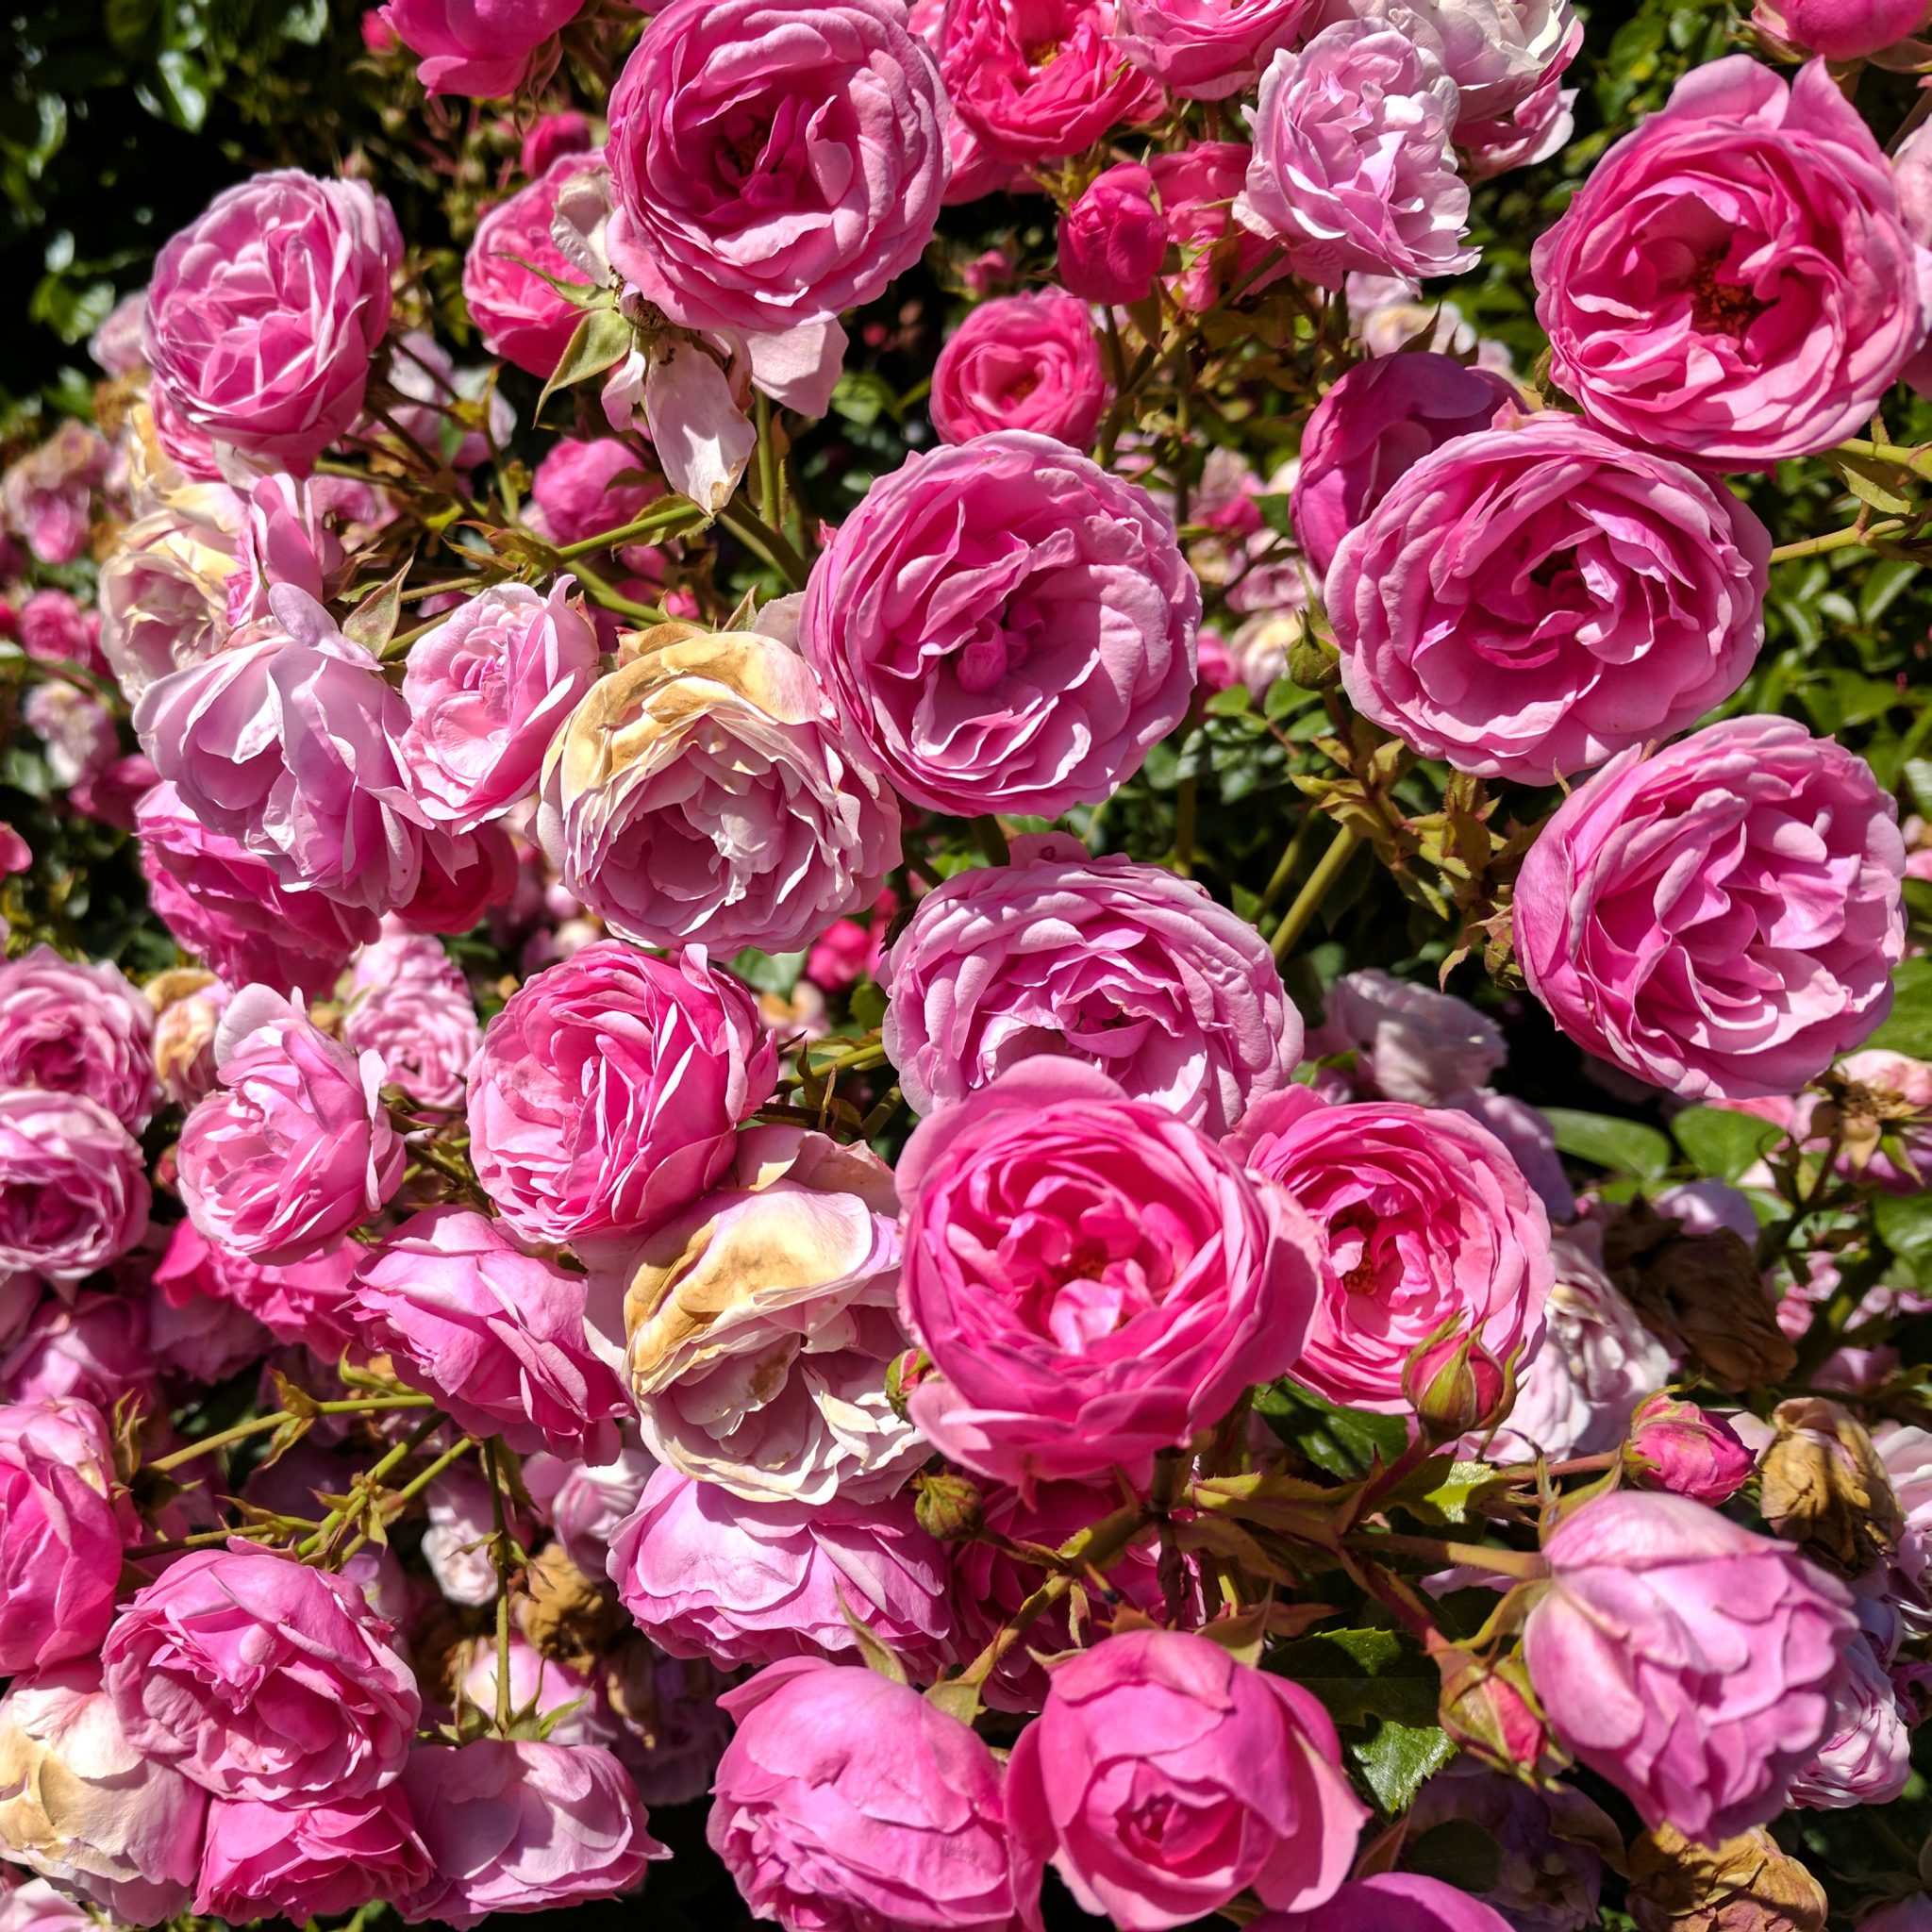 Roses from the Beacon Hill Park in Victoria British Columbia Canada